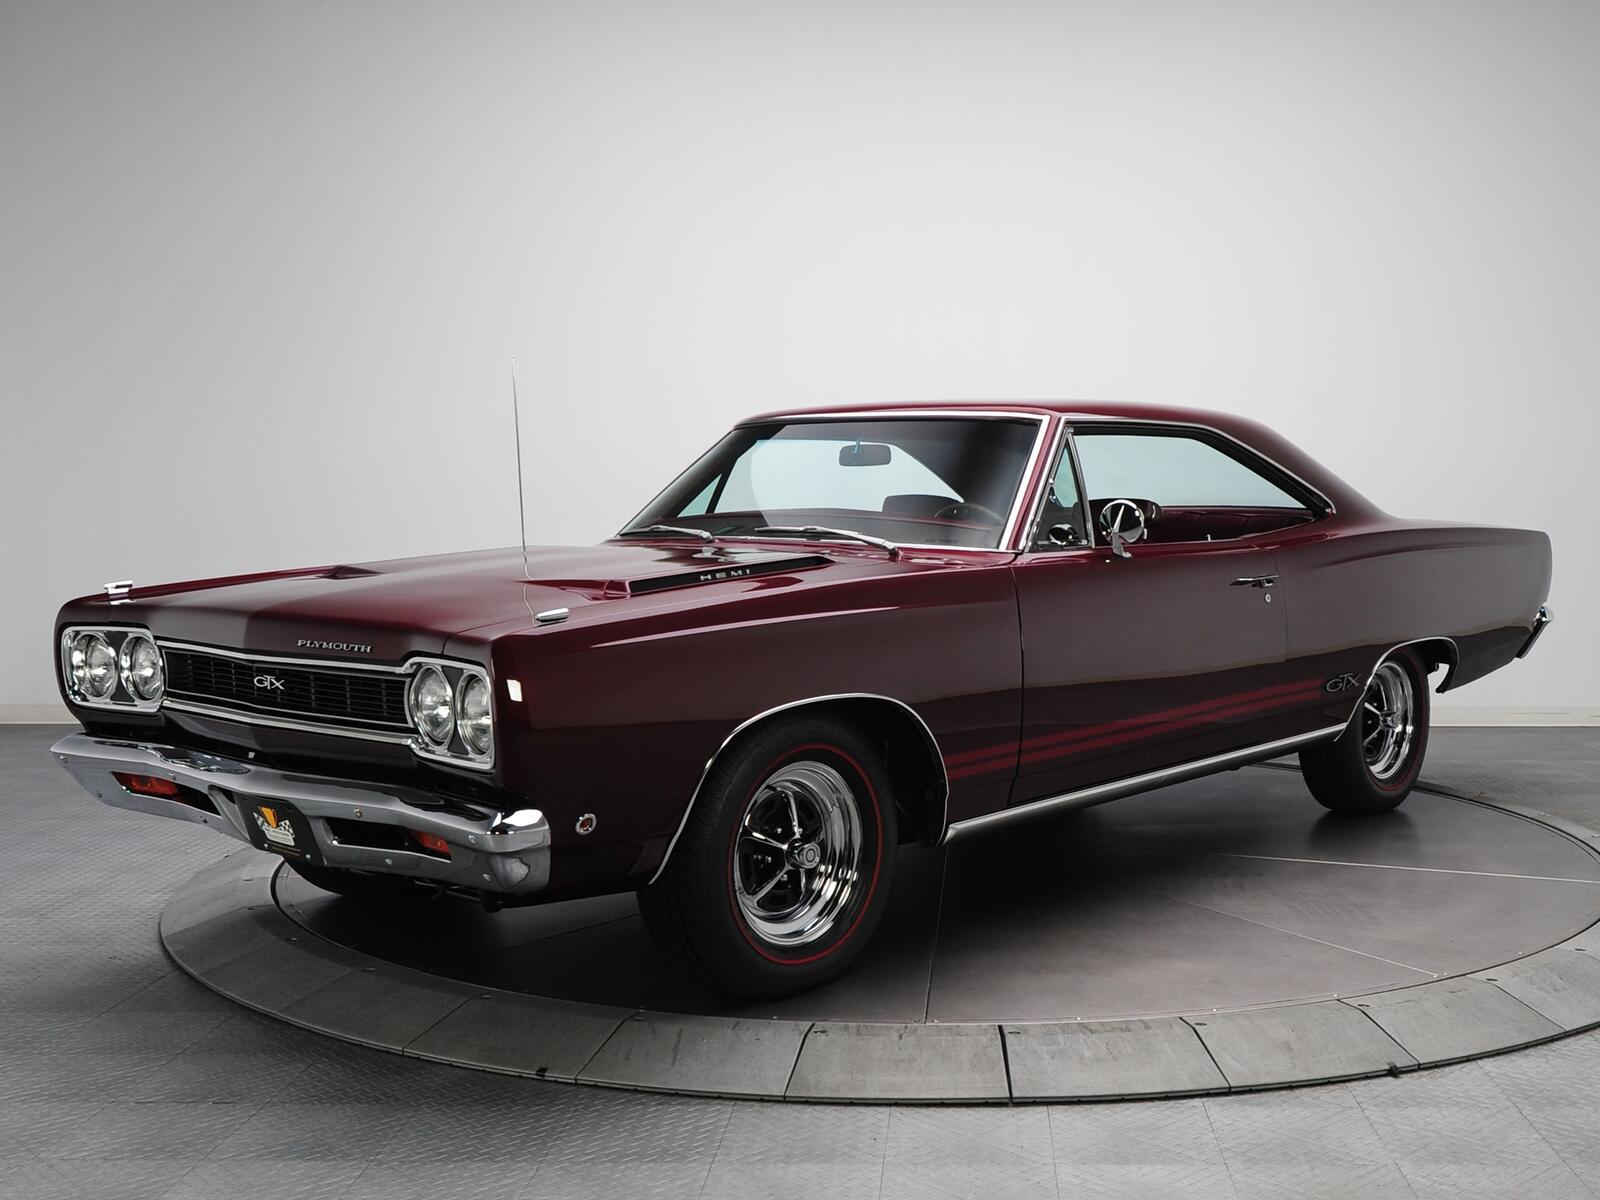 Wallpapers cars plymouth gtx 1968 automobiles on the desktop